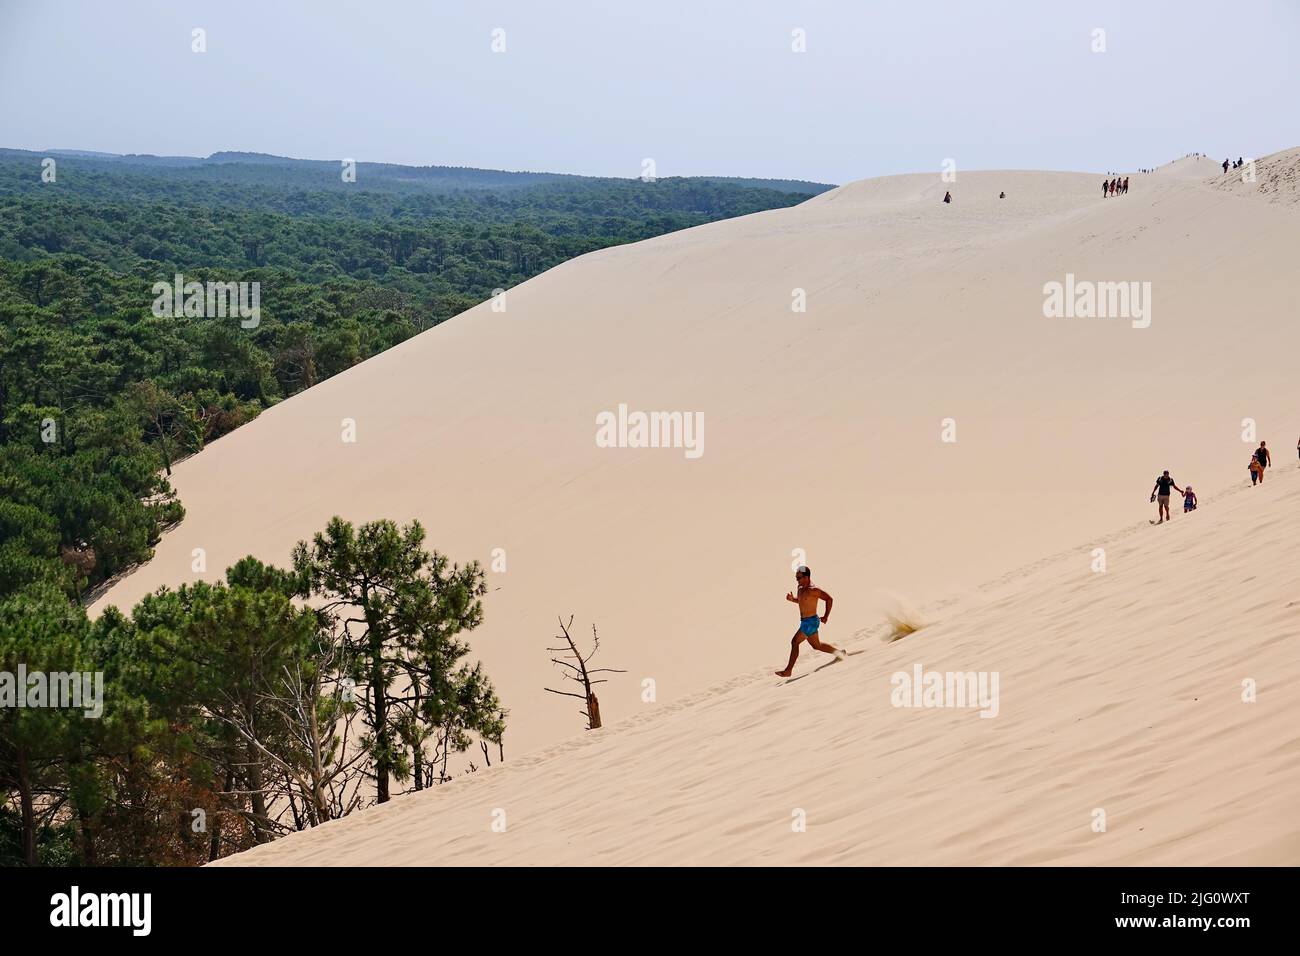 Dune du Pyla - the largest sand dune in Europe, Aquitaine, France - August 2018 Stock Photo